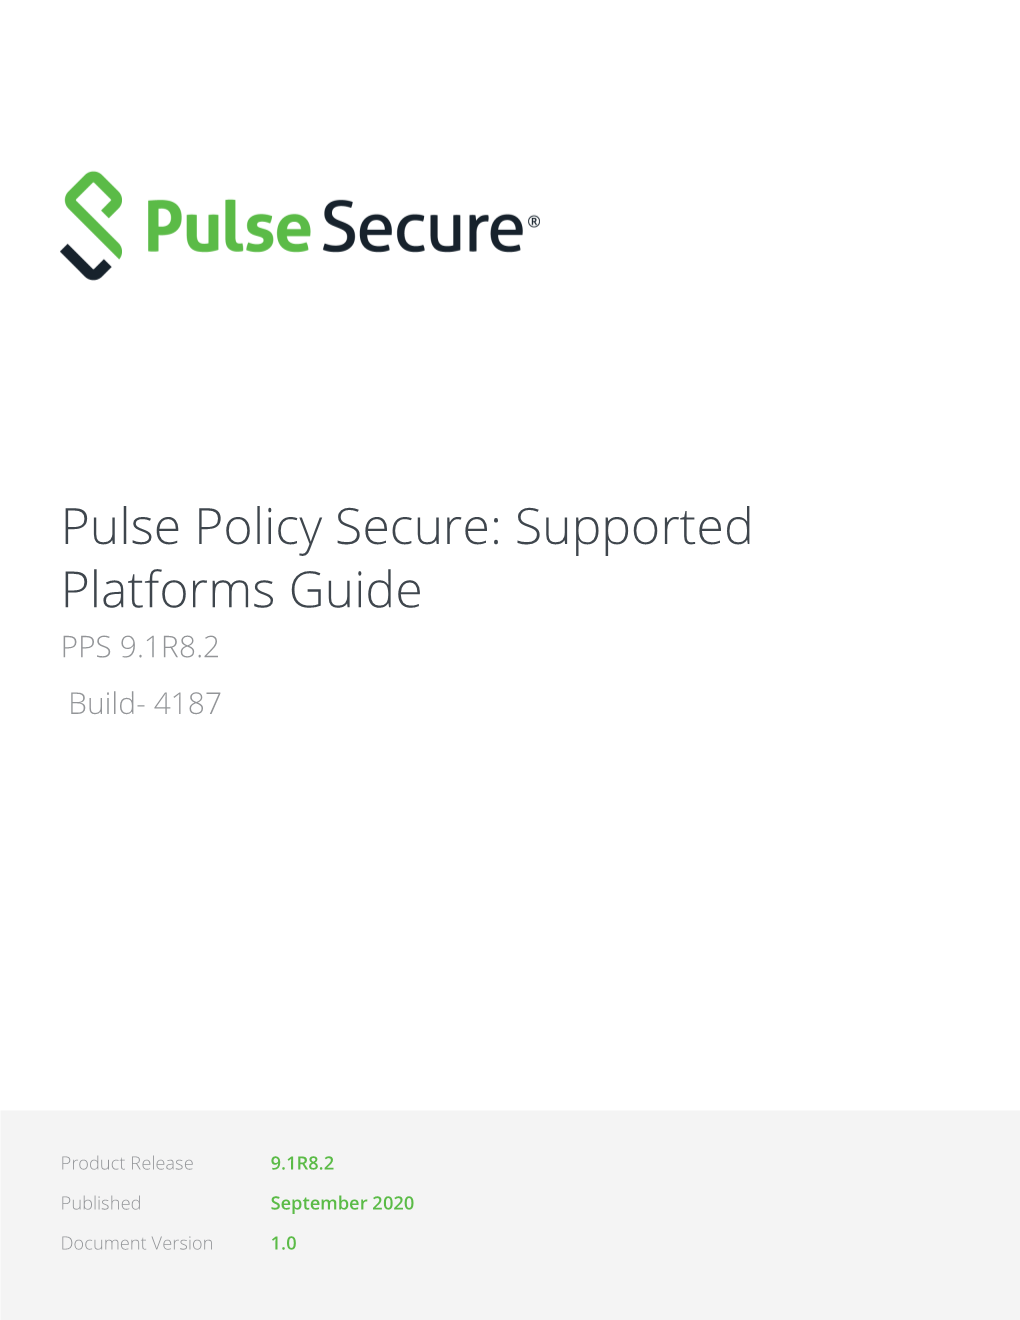 Pulse Policy Secure Supported Platforms Guide 9.1R8.2